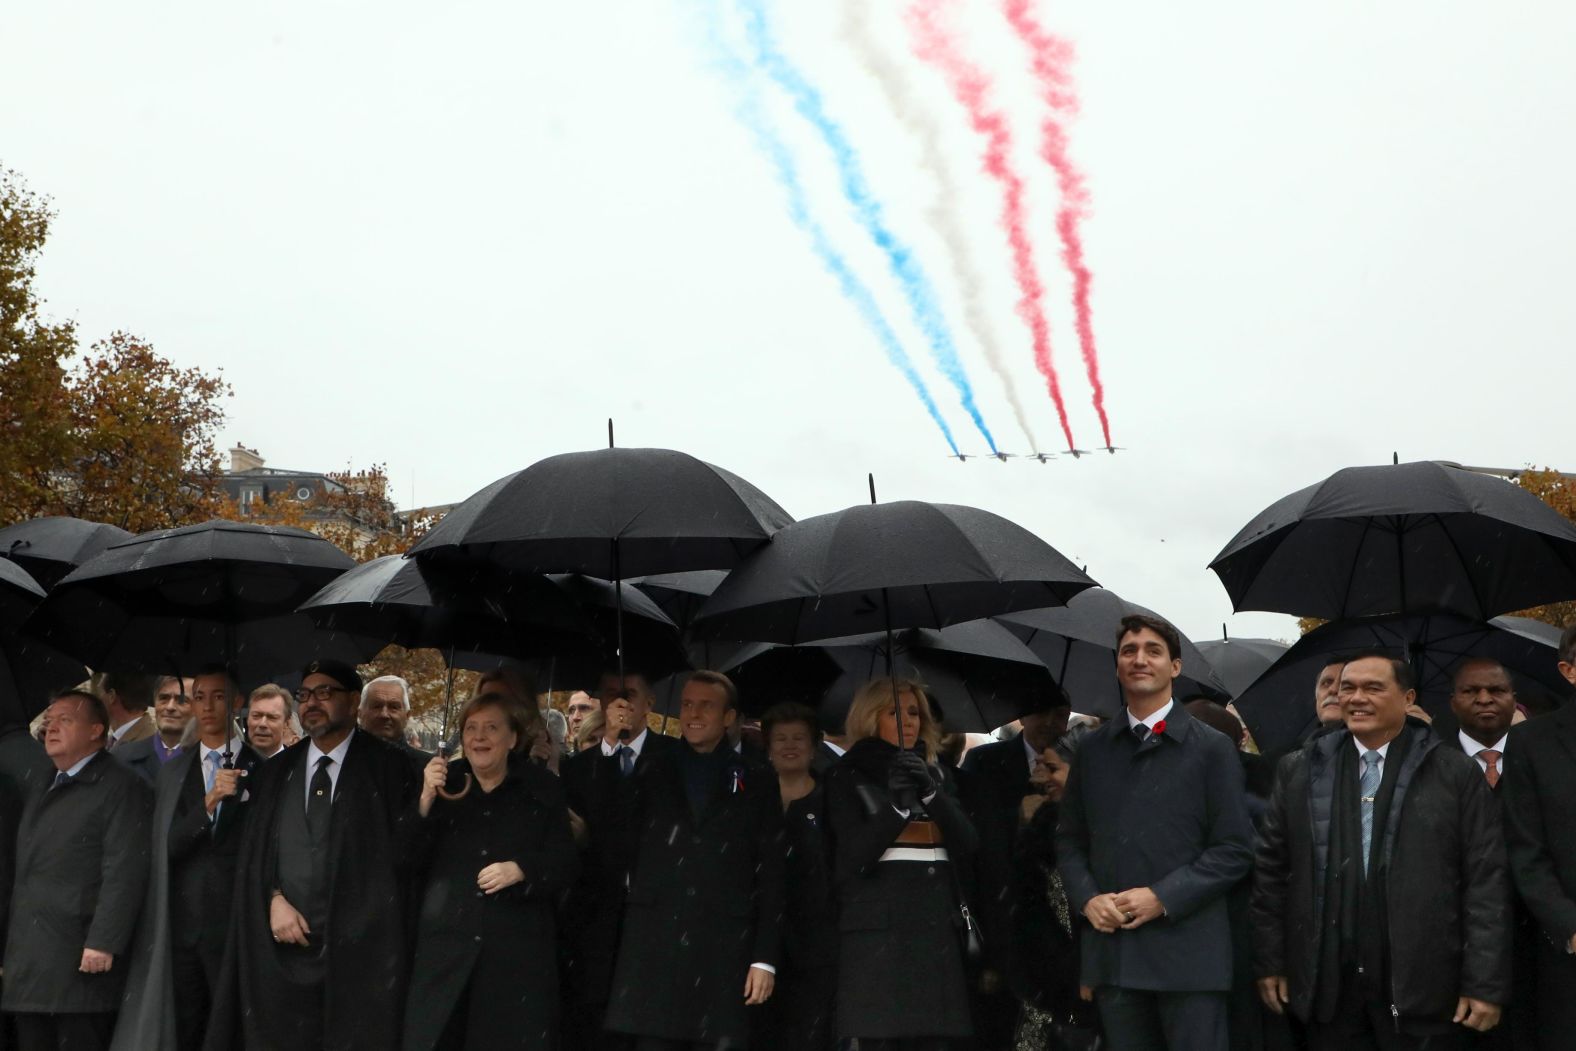 Denmark's Prime Minister Lars Lokke Rasmussen, Morocco's Prince Moulay Hassan, Moroccan King Mohammed VI, German Chancellor Angela Merkel, French President Emmanuel Macron and his wife Brigitte Macron, and Canadian Prime Minister Justin Trudeau arrive at the Arc de Triomphe in Paris on Sunday.